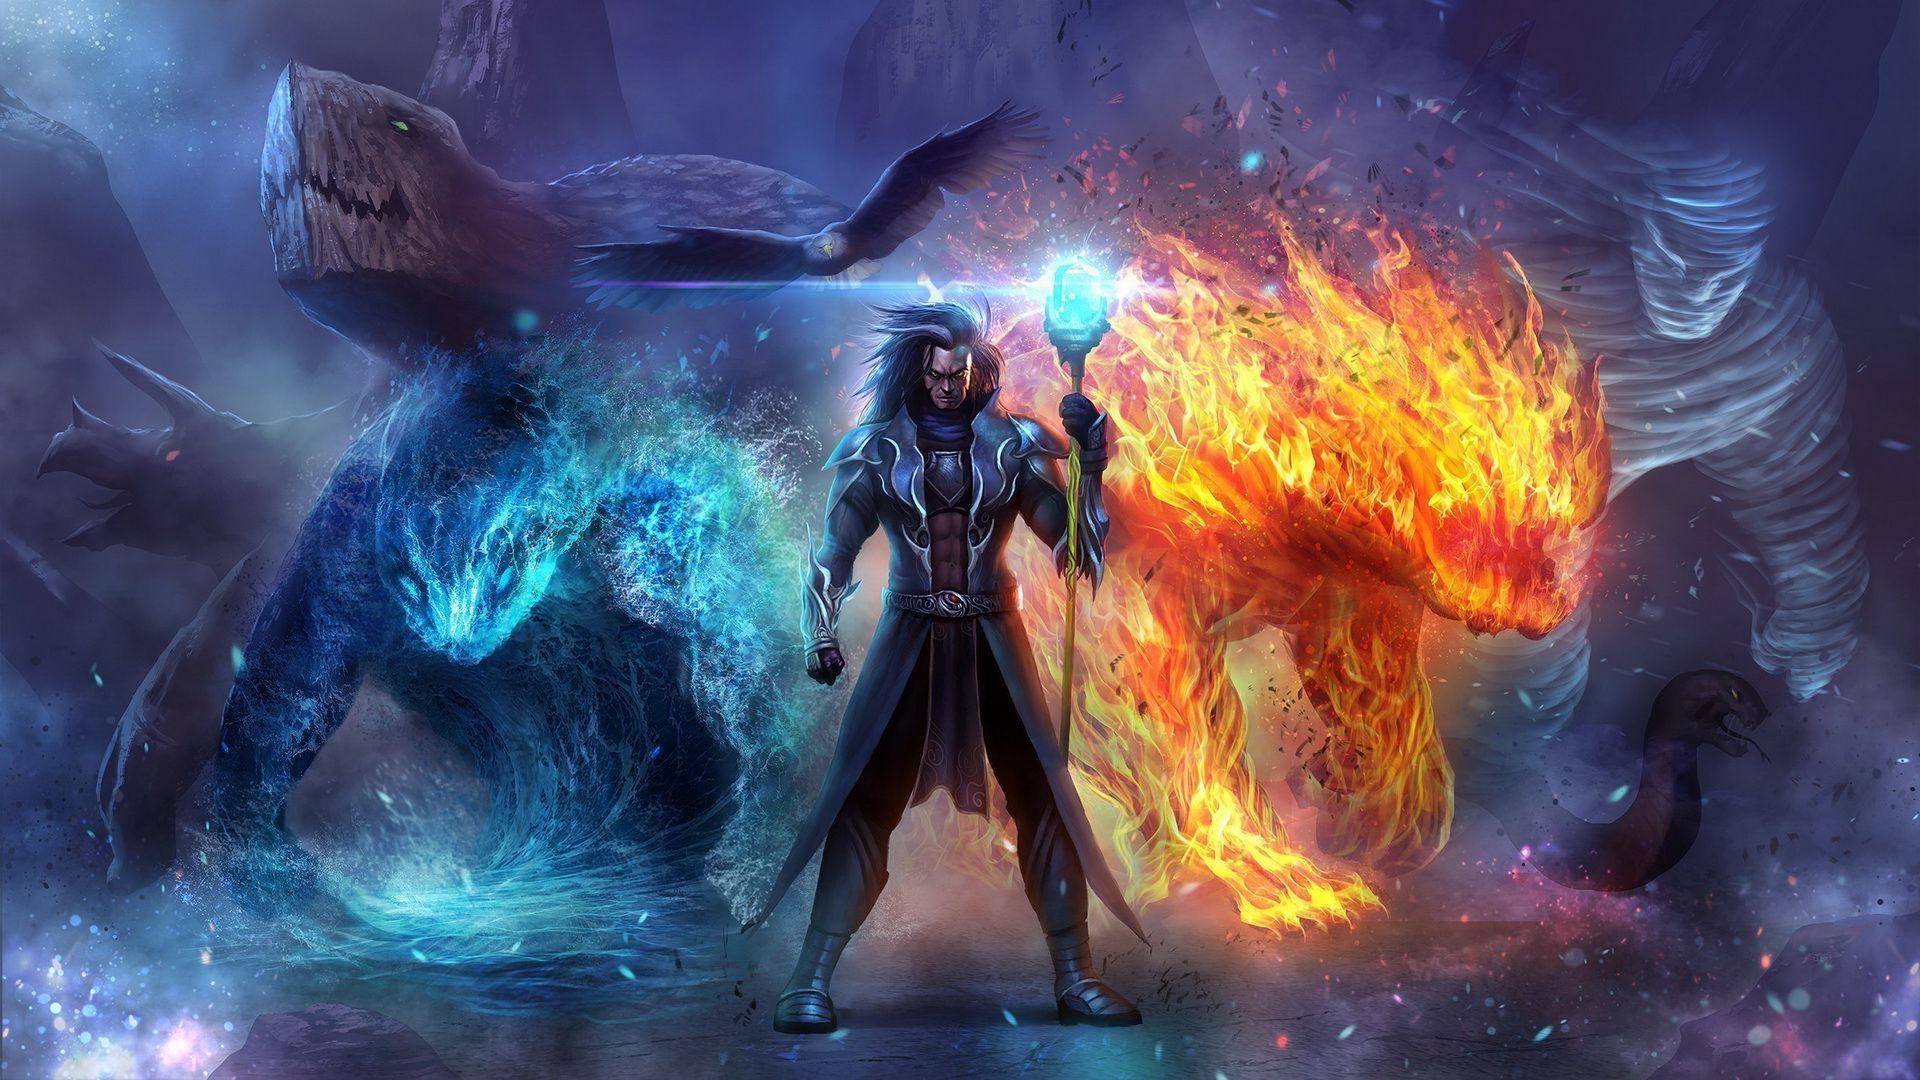 1920x1080 HD Wizard in ice and fire Wallpaper | Download Free - 149843